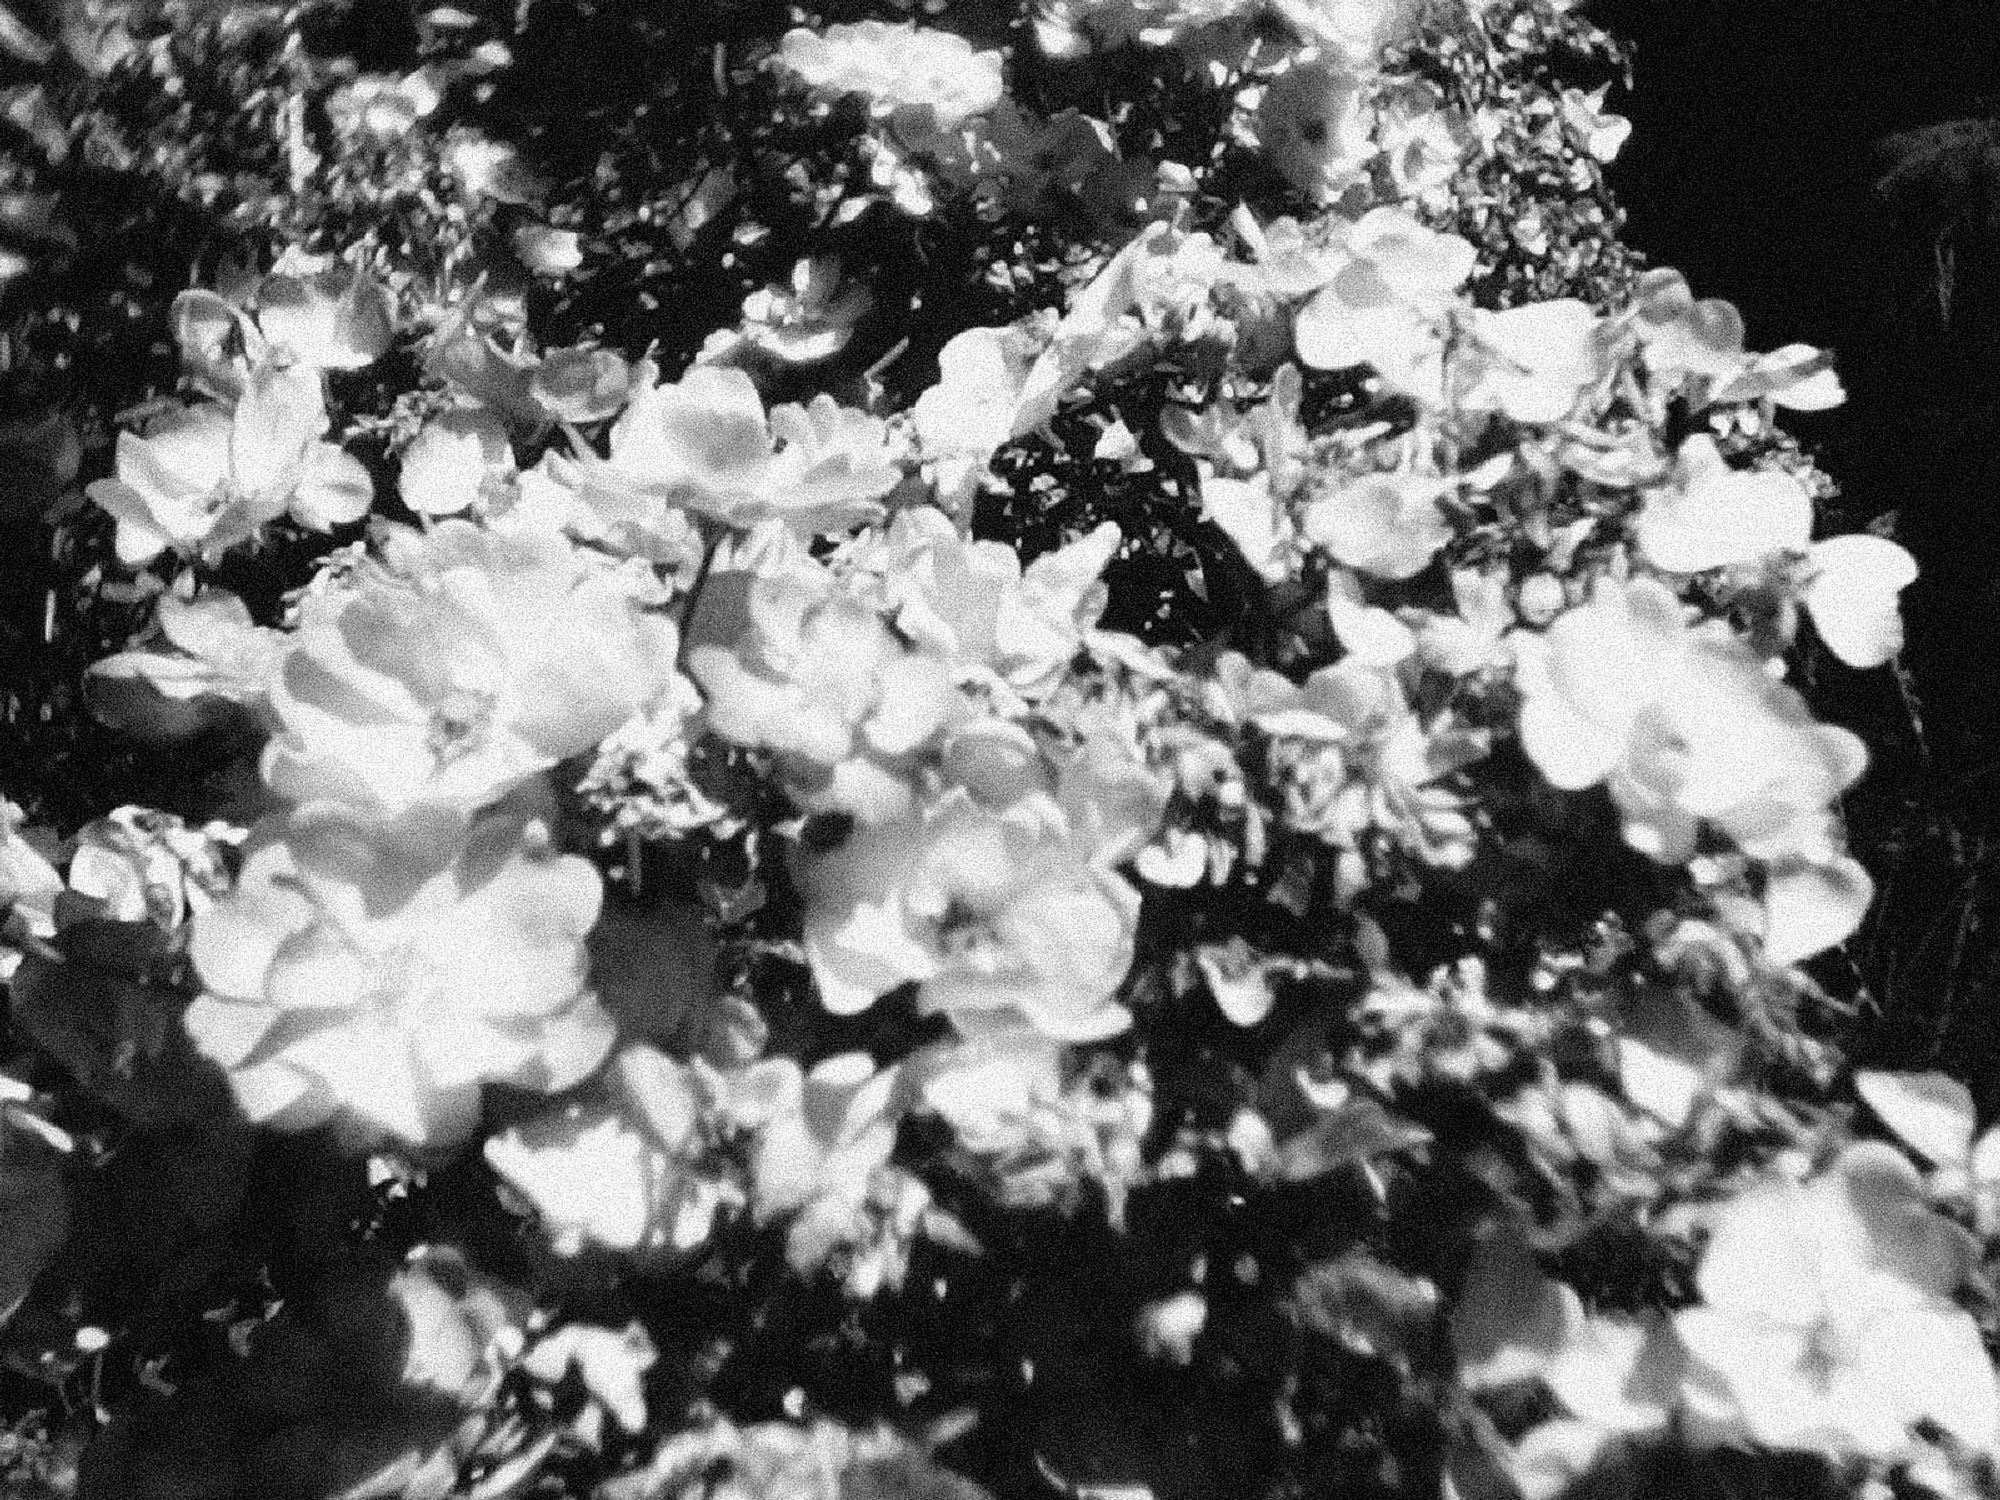 A black and white image of a cluster of flowers in full bloom.